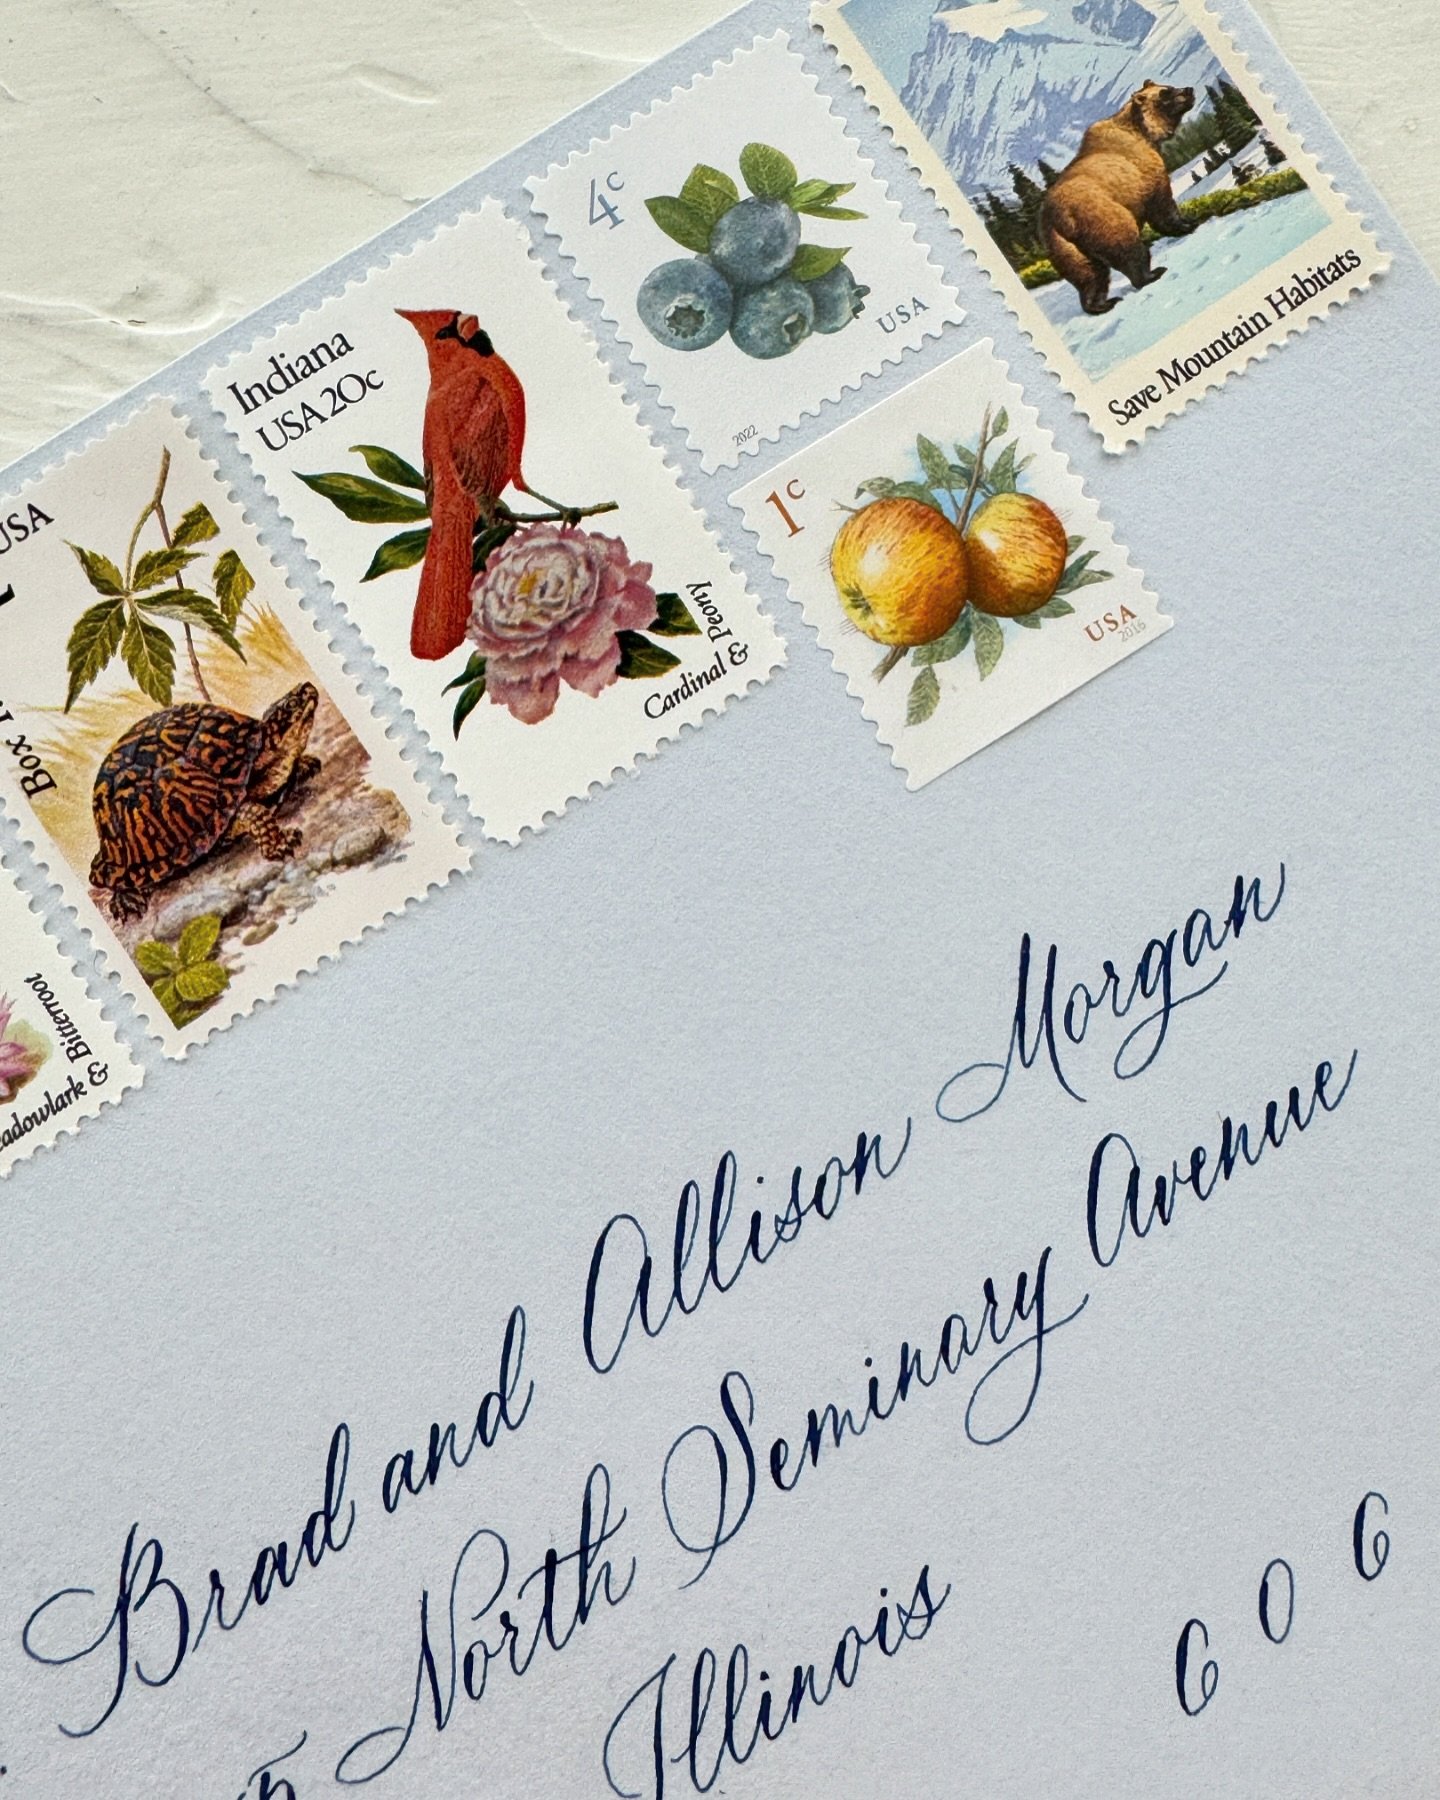 If you&rsquo;re looking for reasons to *not* pair vintage stamps with calligraphy&hellip;you&rsquo;ve come to the wrong place. Consider this a vintage stamp stan account. 💌

#weddingenvelopes #envelopecalligraphy #calligraphy #weddingcalligraphy #mo